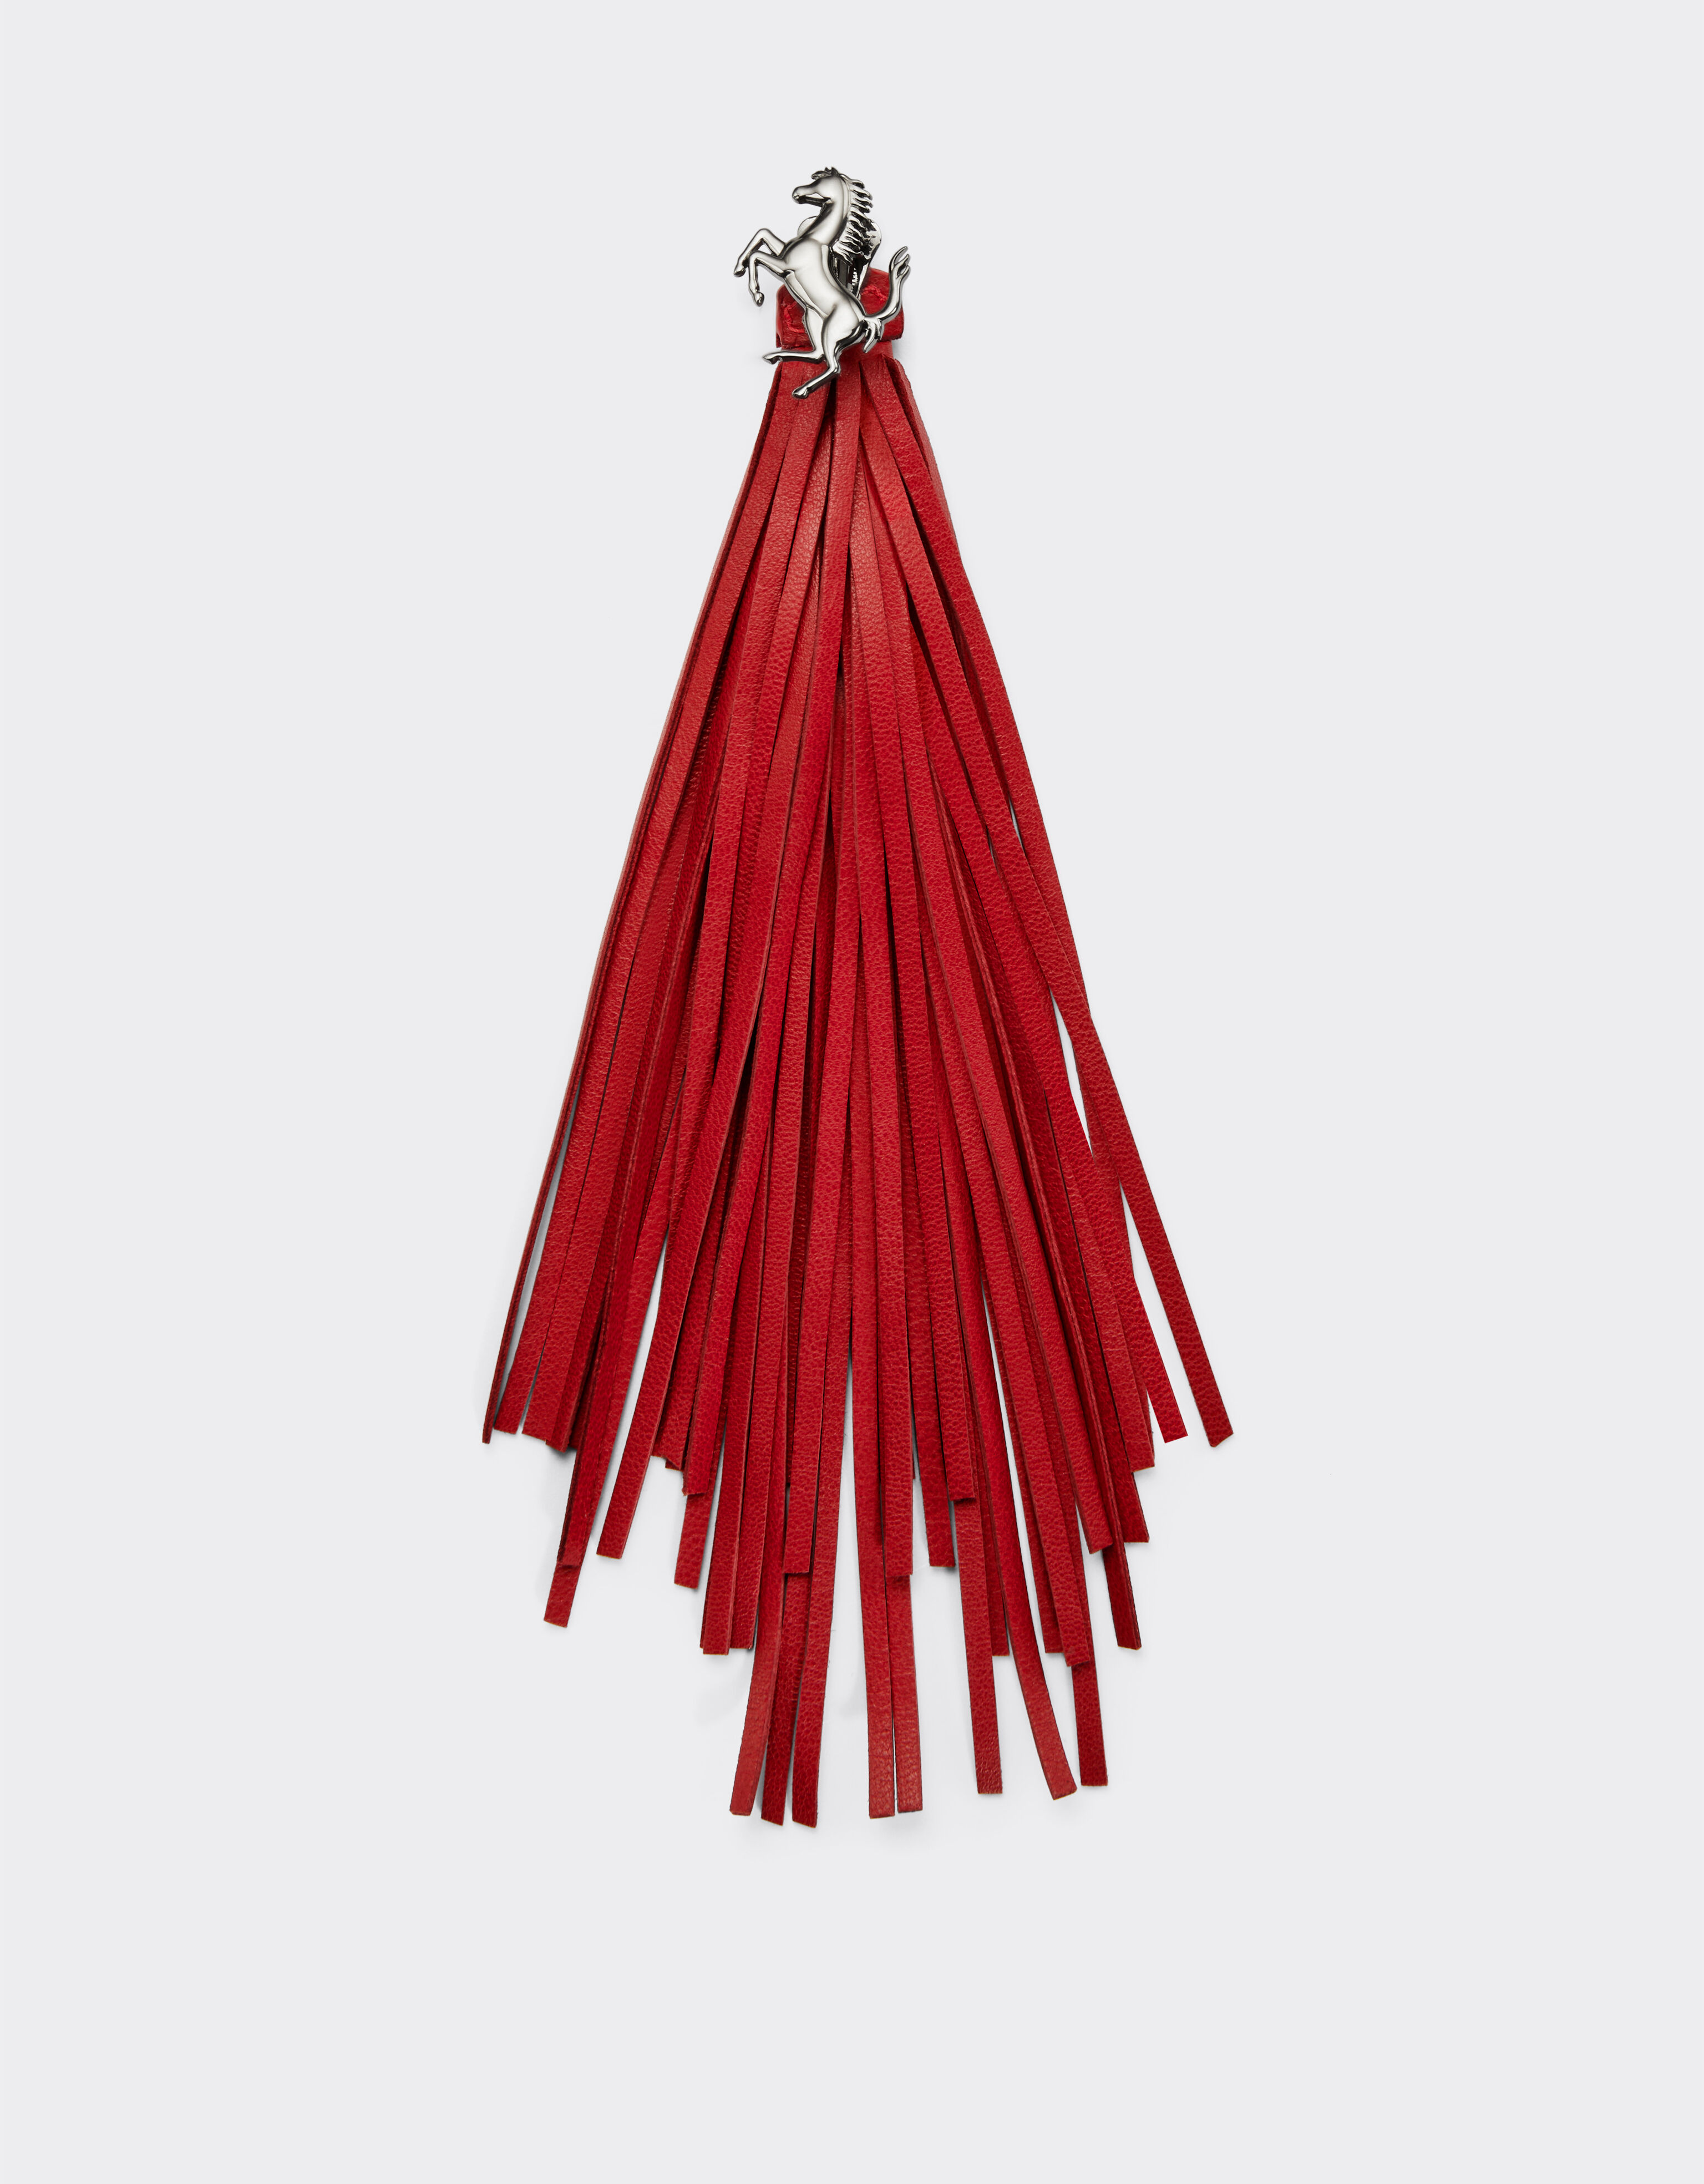 Ferrari Earrings with Prancing Horse detail and leather tassel Charcoal 20010f